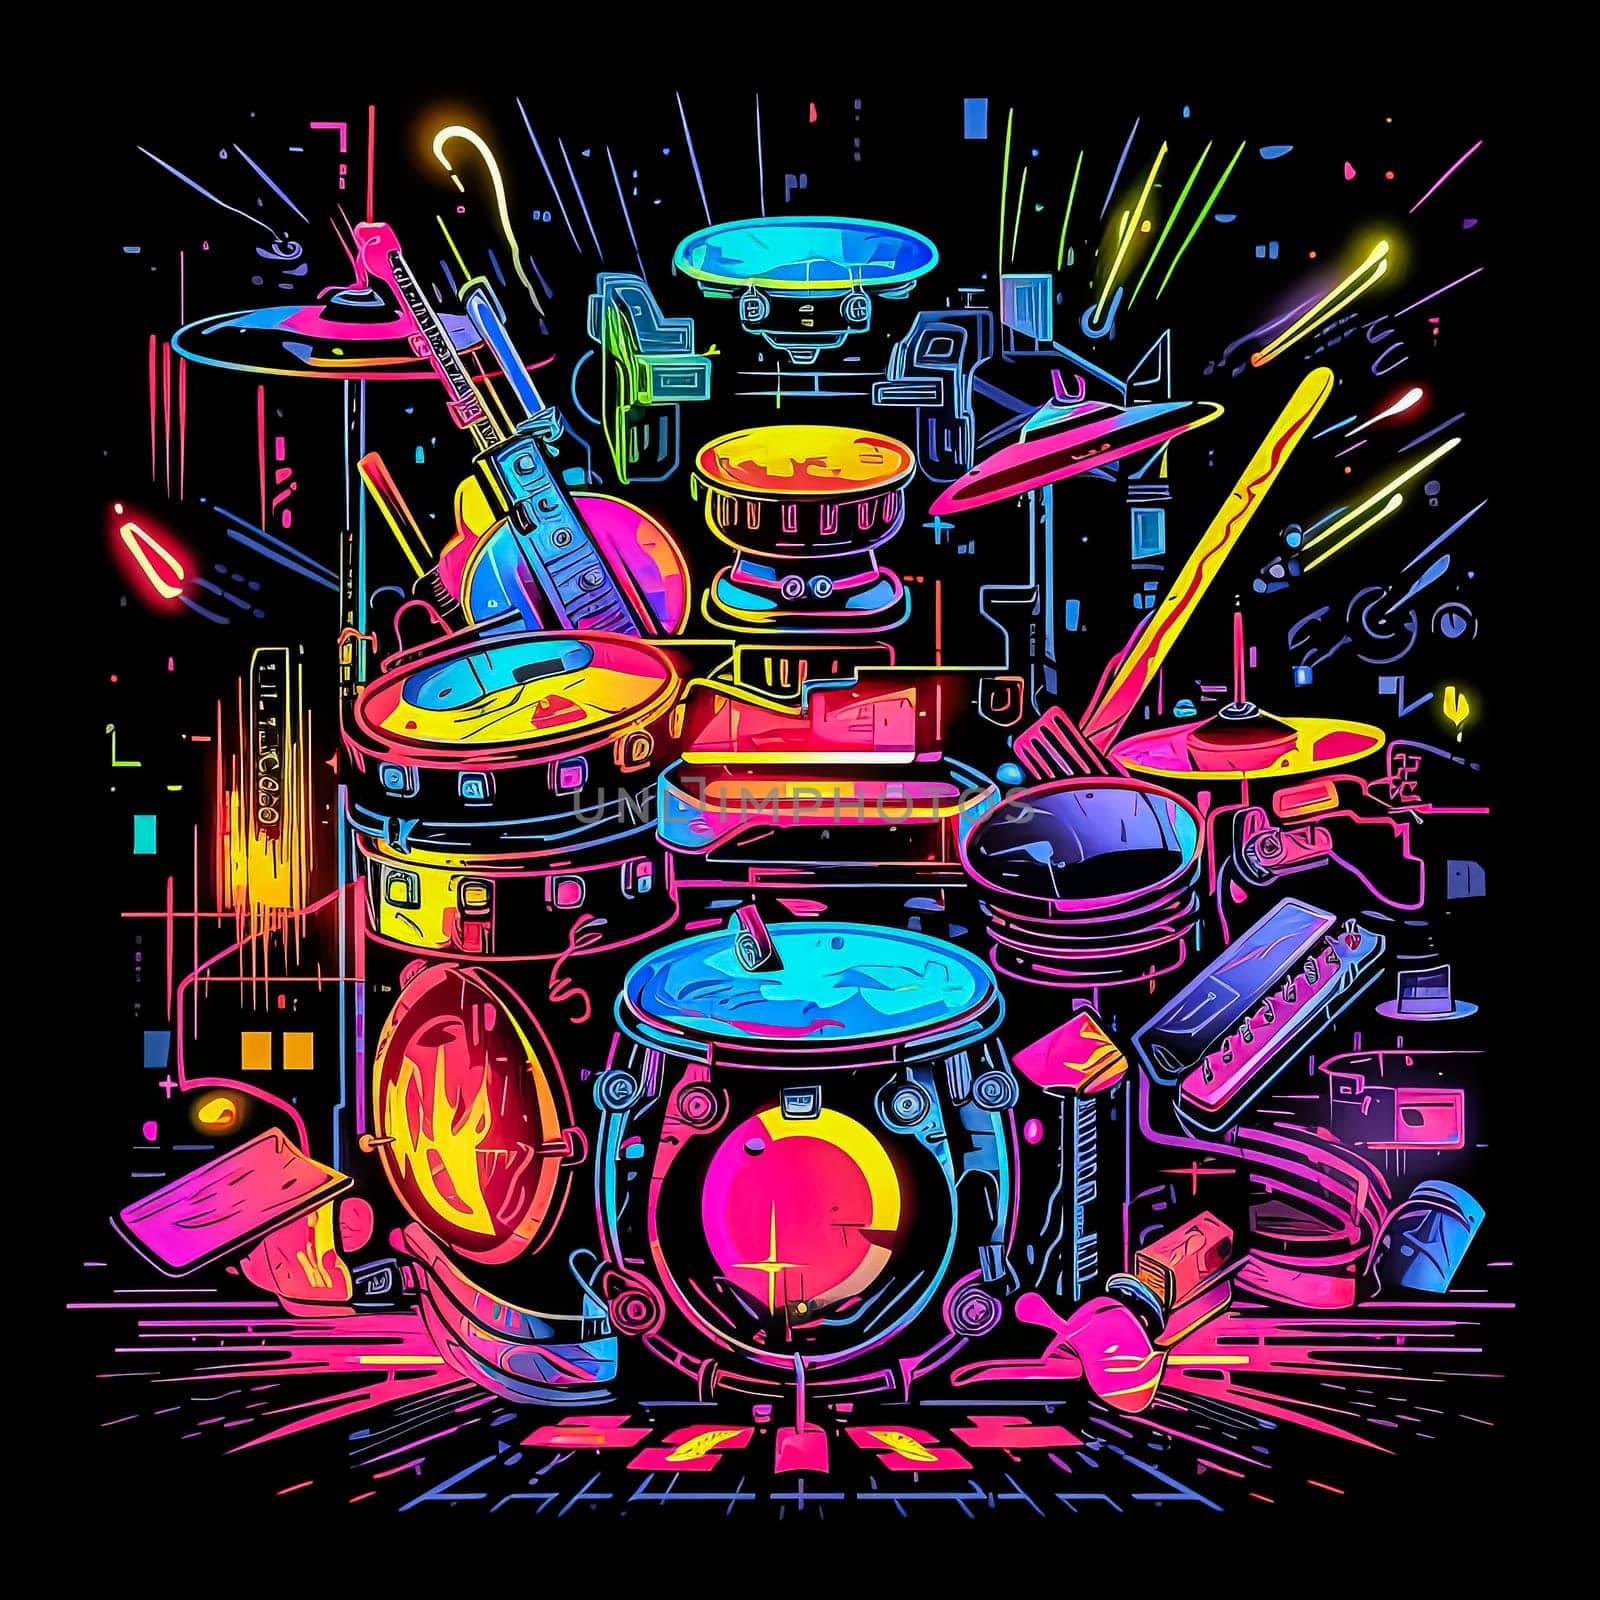 A colorful poster of a drum set and other instruments. The poster is a representation of a band or a musical performance. The vibrant colors and the variety of instruments suggest a lively